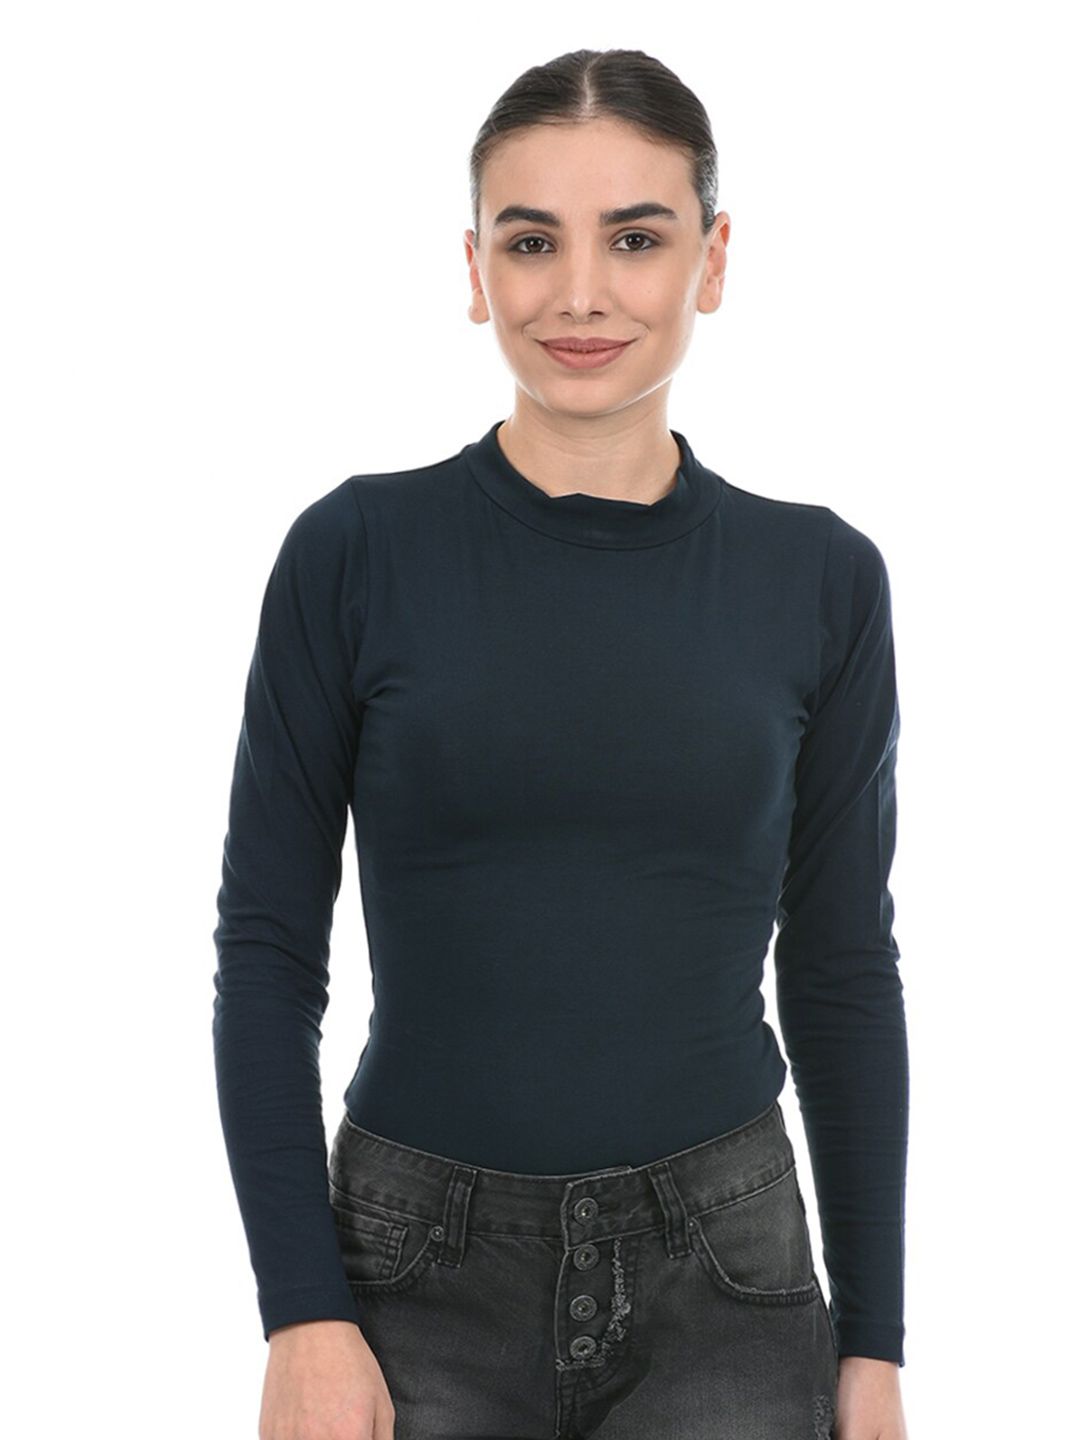 ONEWAY High Neck Top Price in India